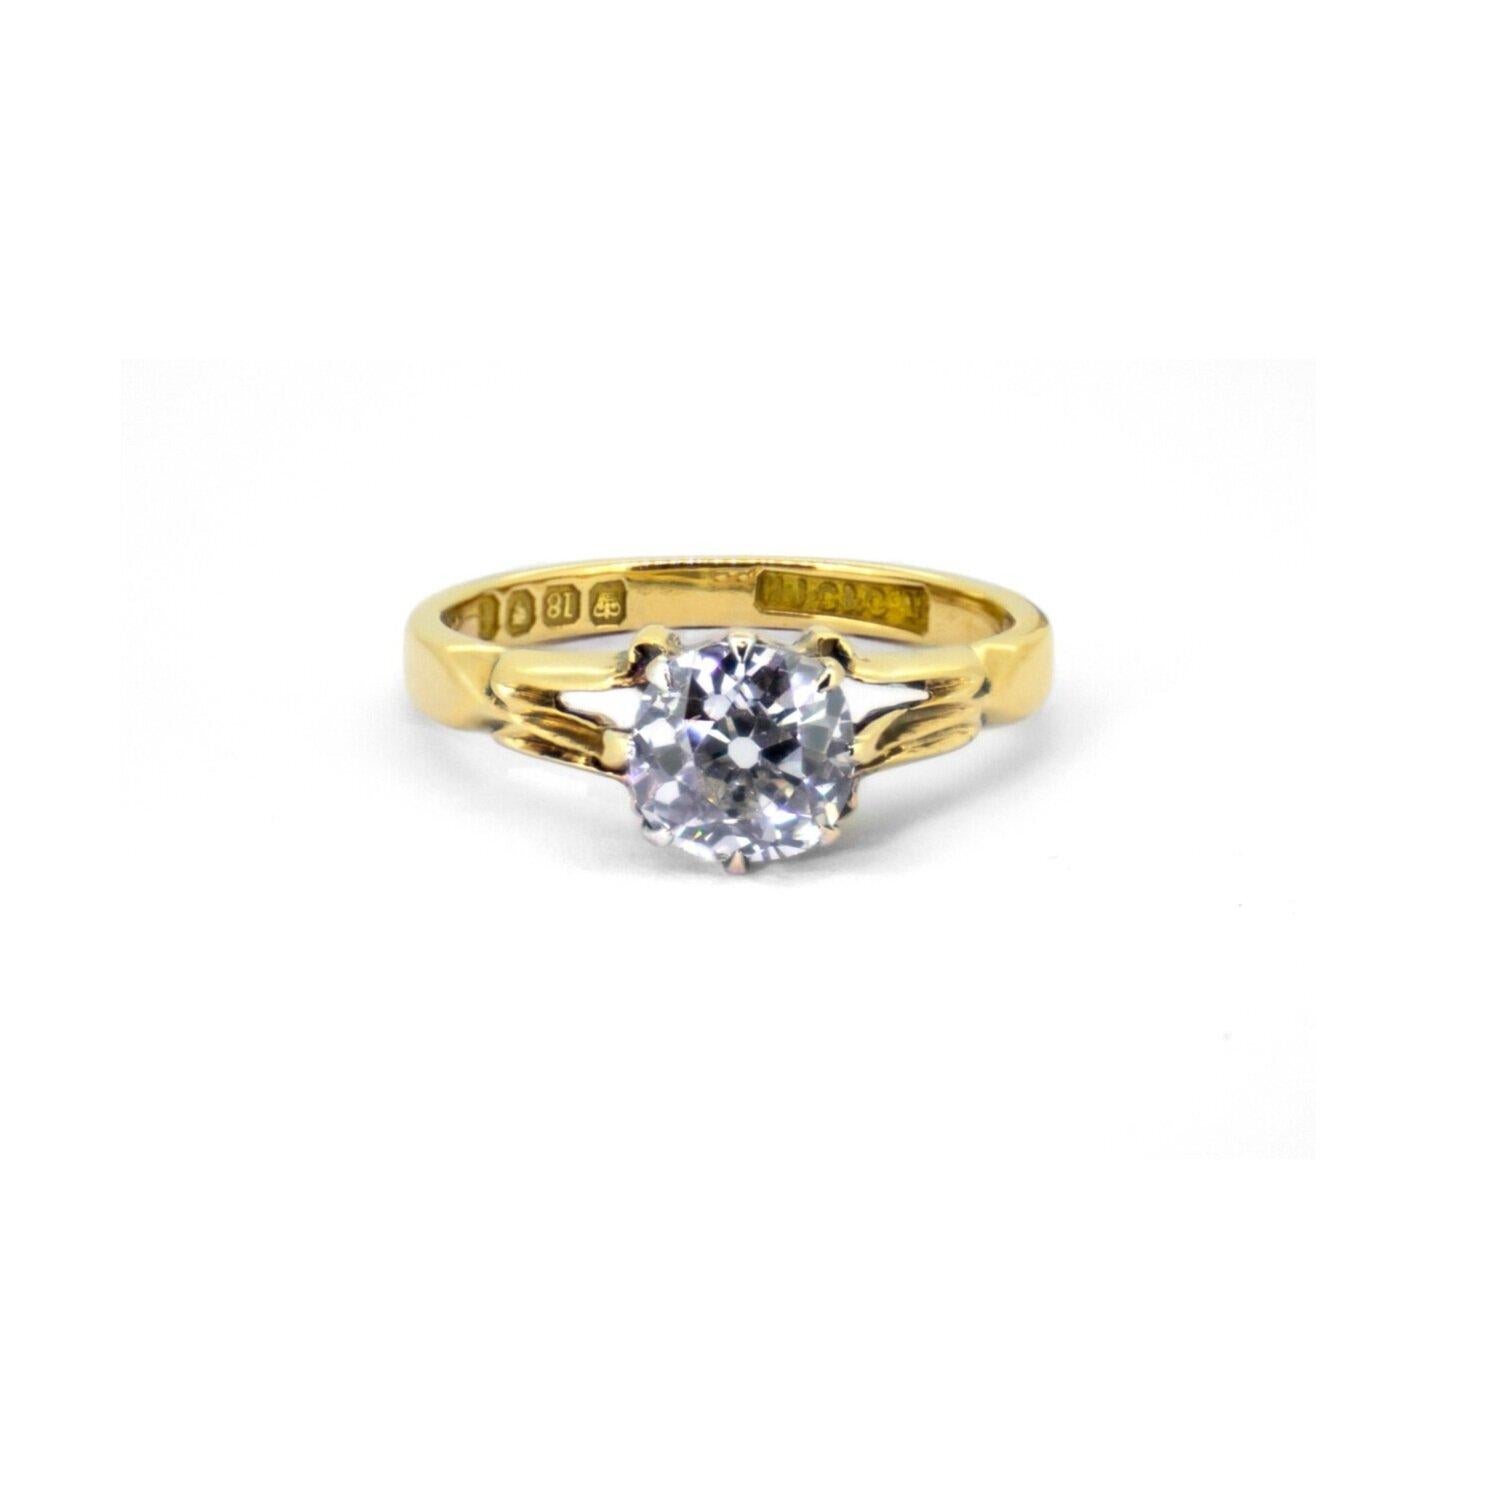 1906 Antique 1.01ct Old Cut Diamond Carved Solitaire Ring 18k In Good Condition For Sale In London, GB